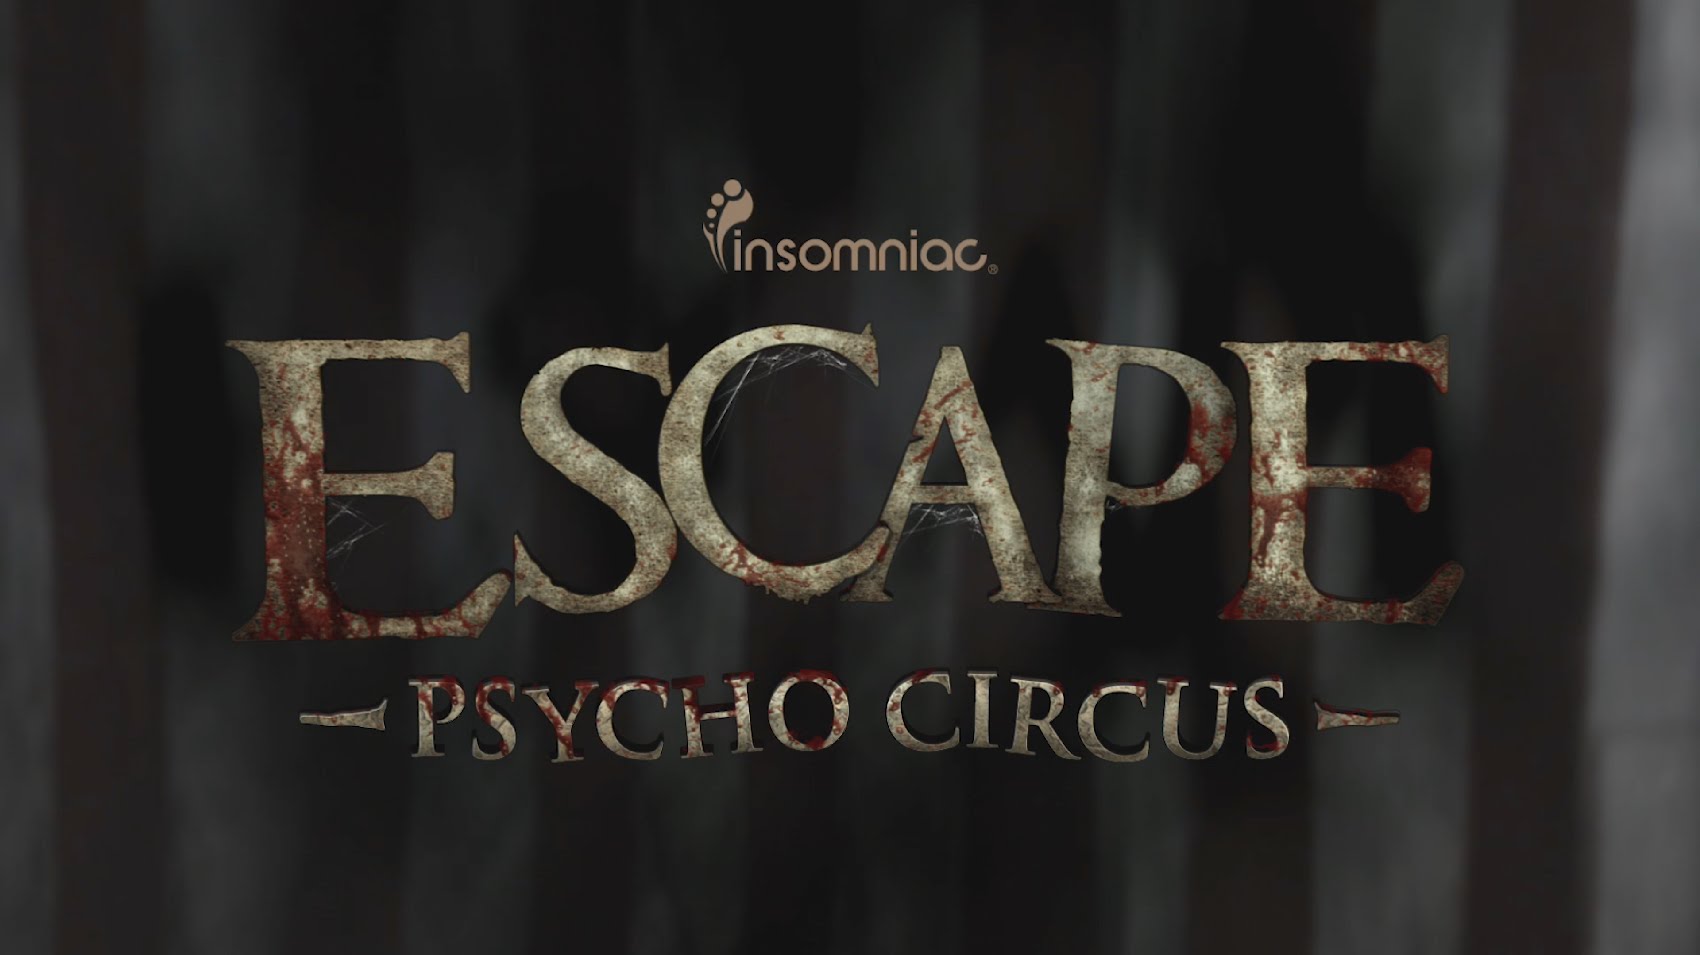 Escape: Psycho Circus, hard day of the dead festival, arrests, ultimate spotlight, ultimate spotlight magazine, usl magazine, uslmagazine.com, usl mag, uslmag.com, uslmag, ultimate spotlight, atlanta music magazine, baltimore music magazine, d.c. music magazine